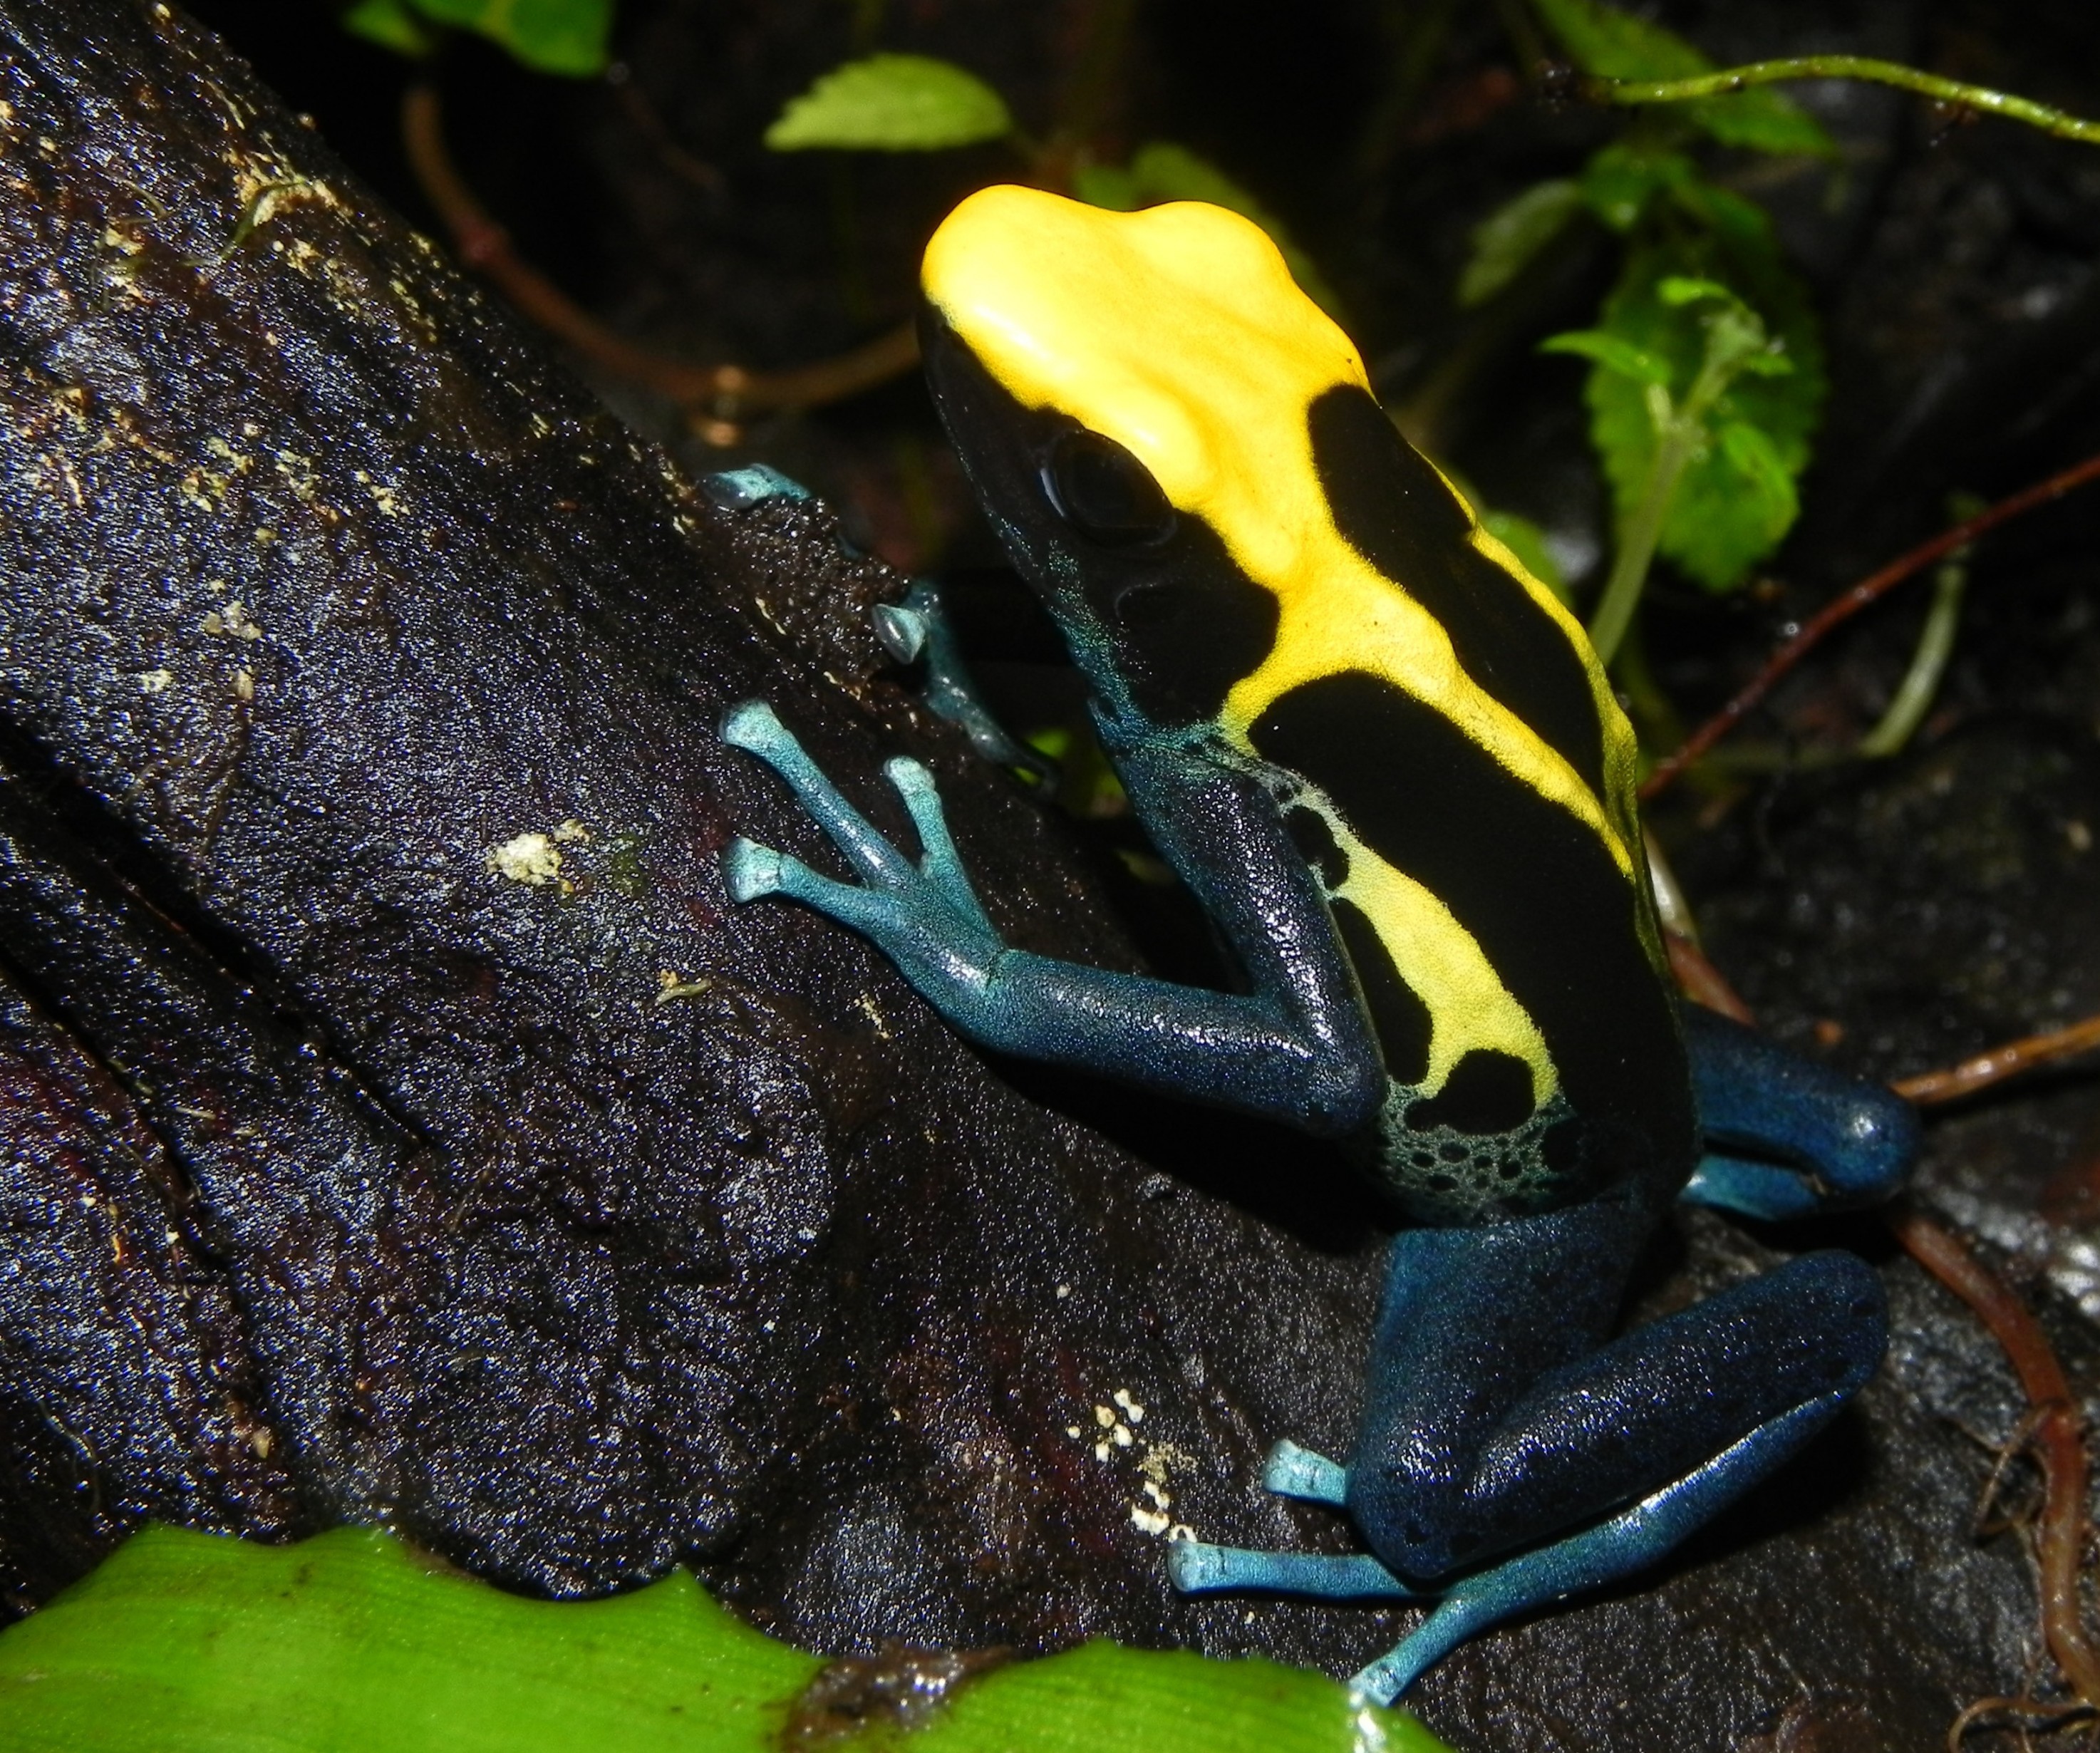 Download 2947x2460 Poison Dart Frog, Black And Yellow Wallpaper